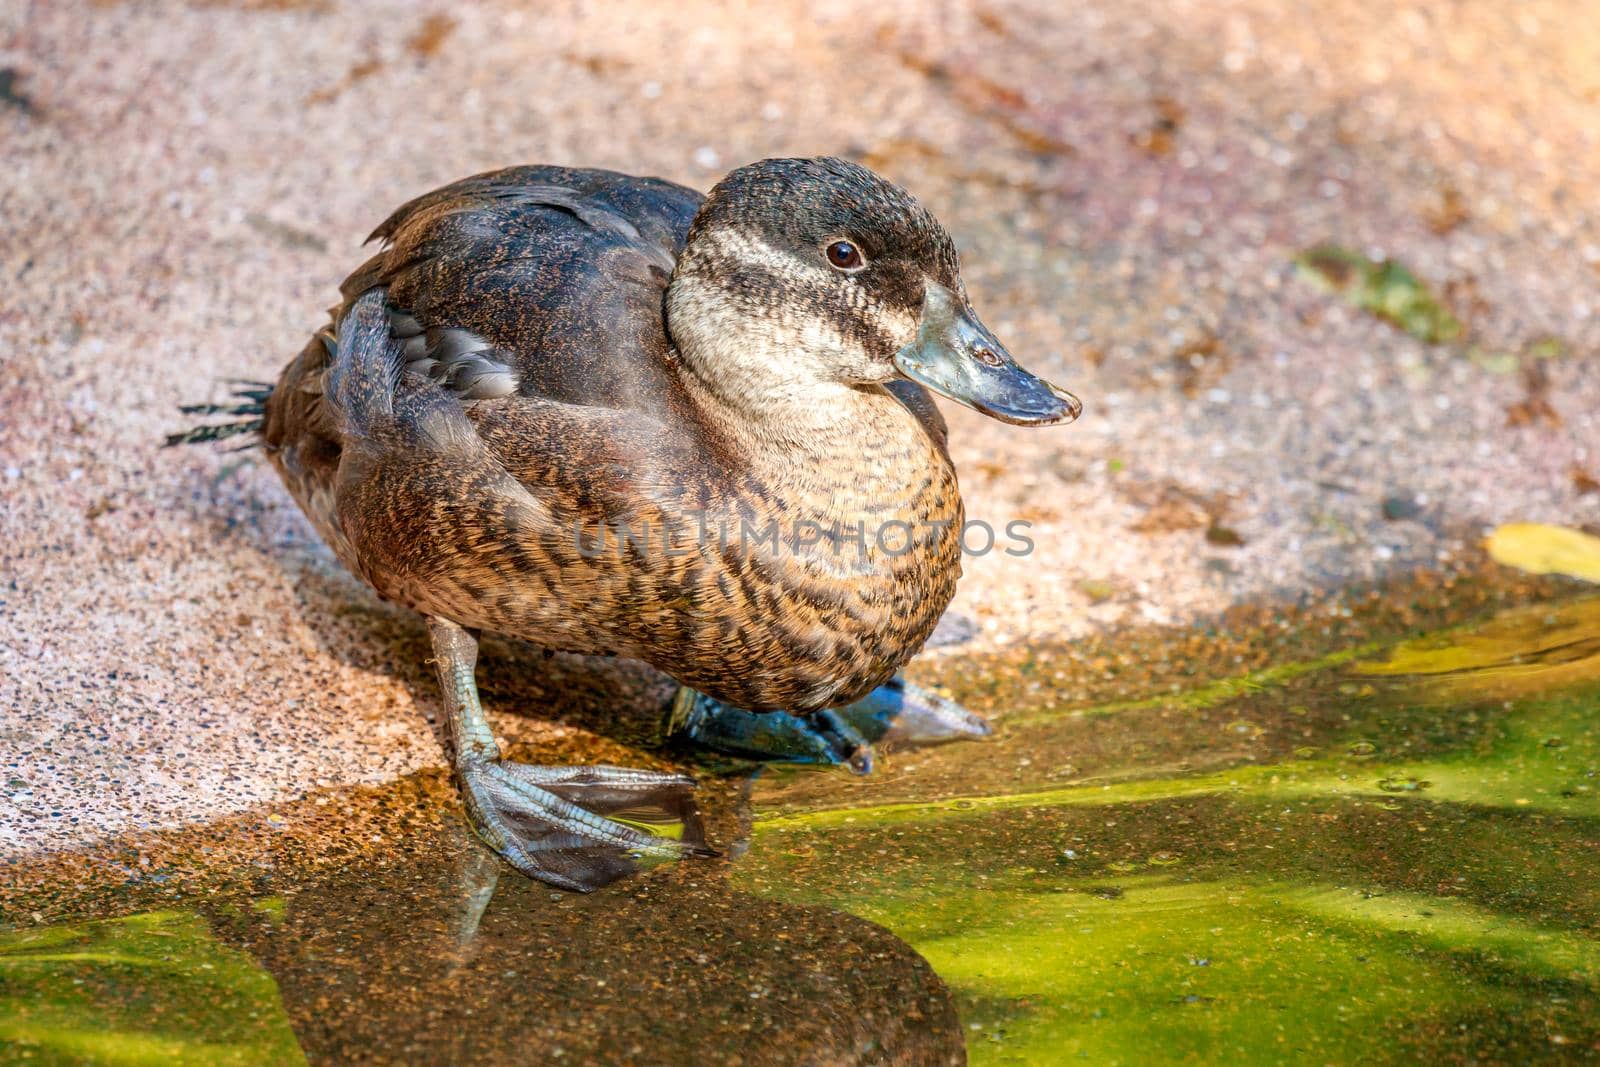 A Female Maccoa Duck stands by the pond, with reflection in water.